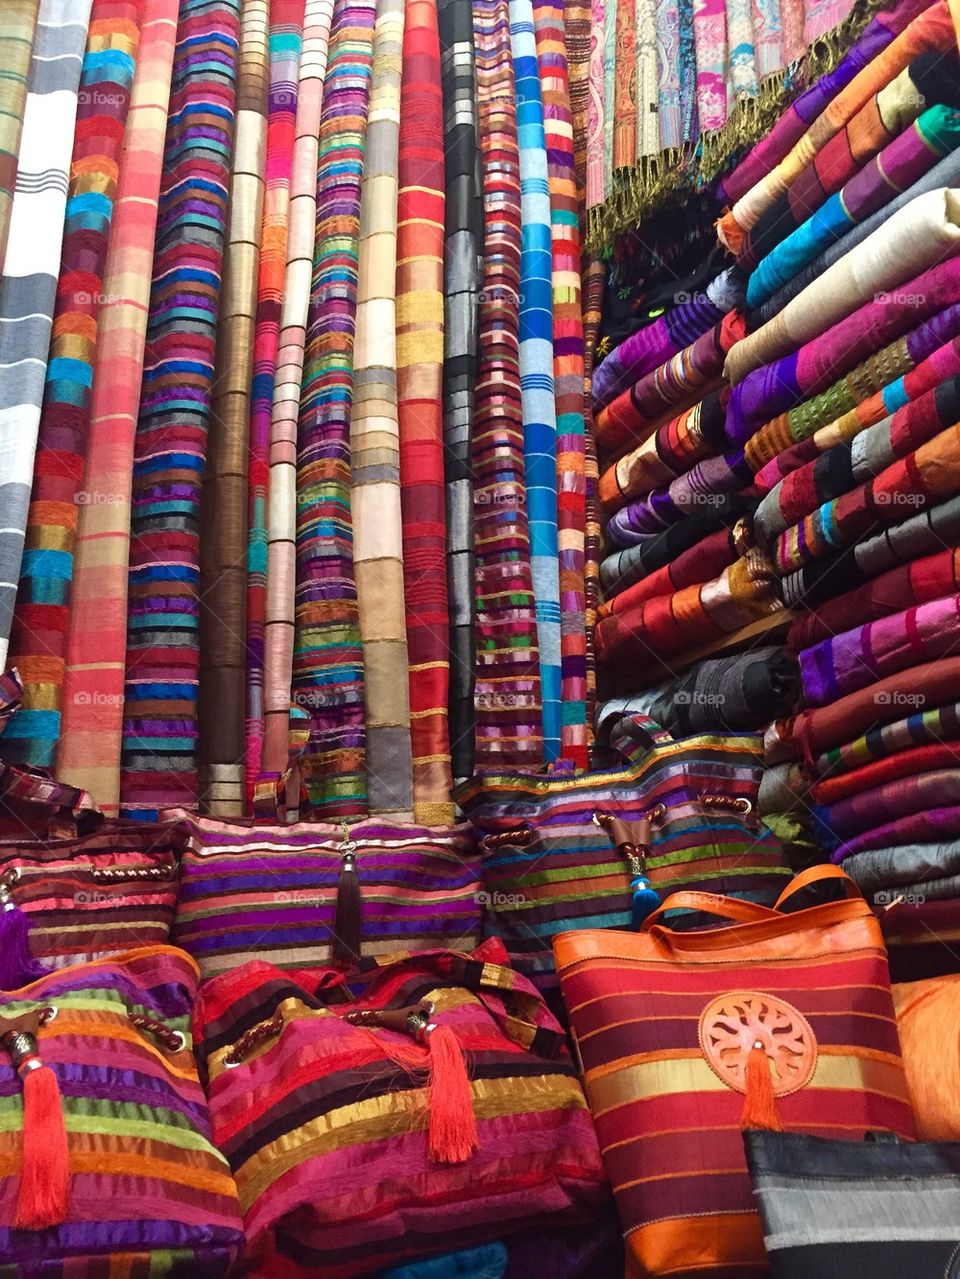 Fabric for sale, Marrakech